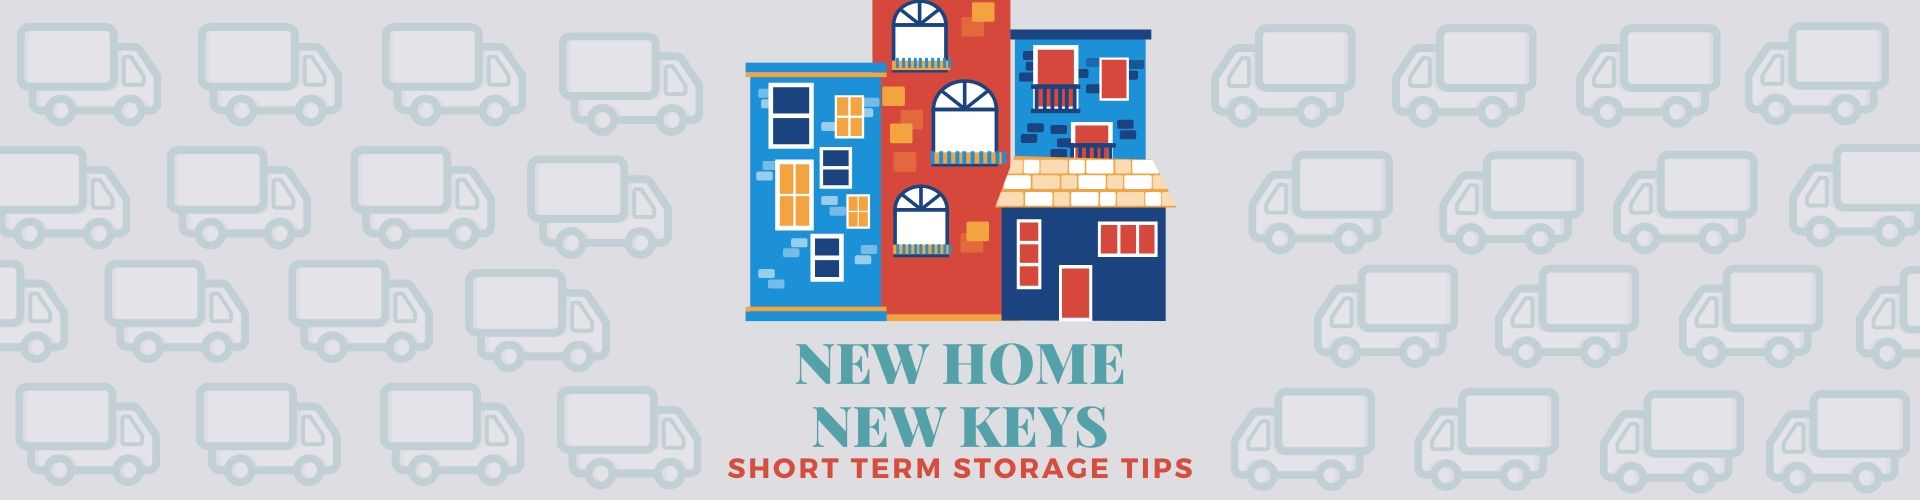 Temporary Storage Ideas to Use for the Summer